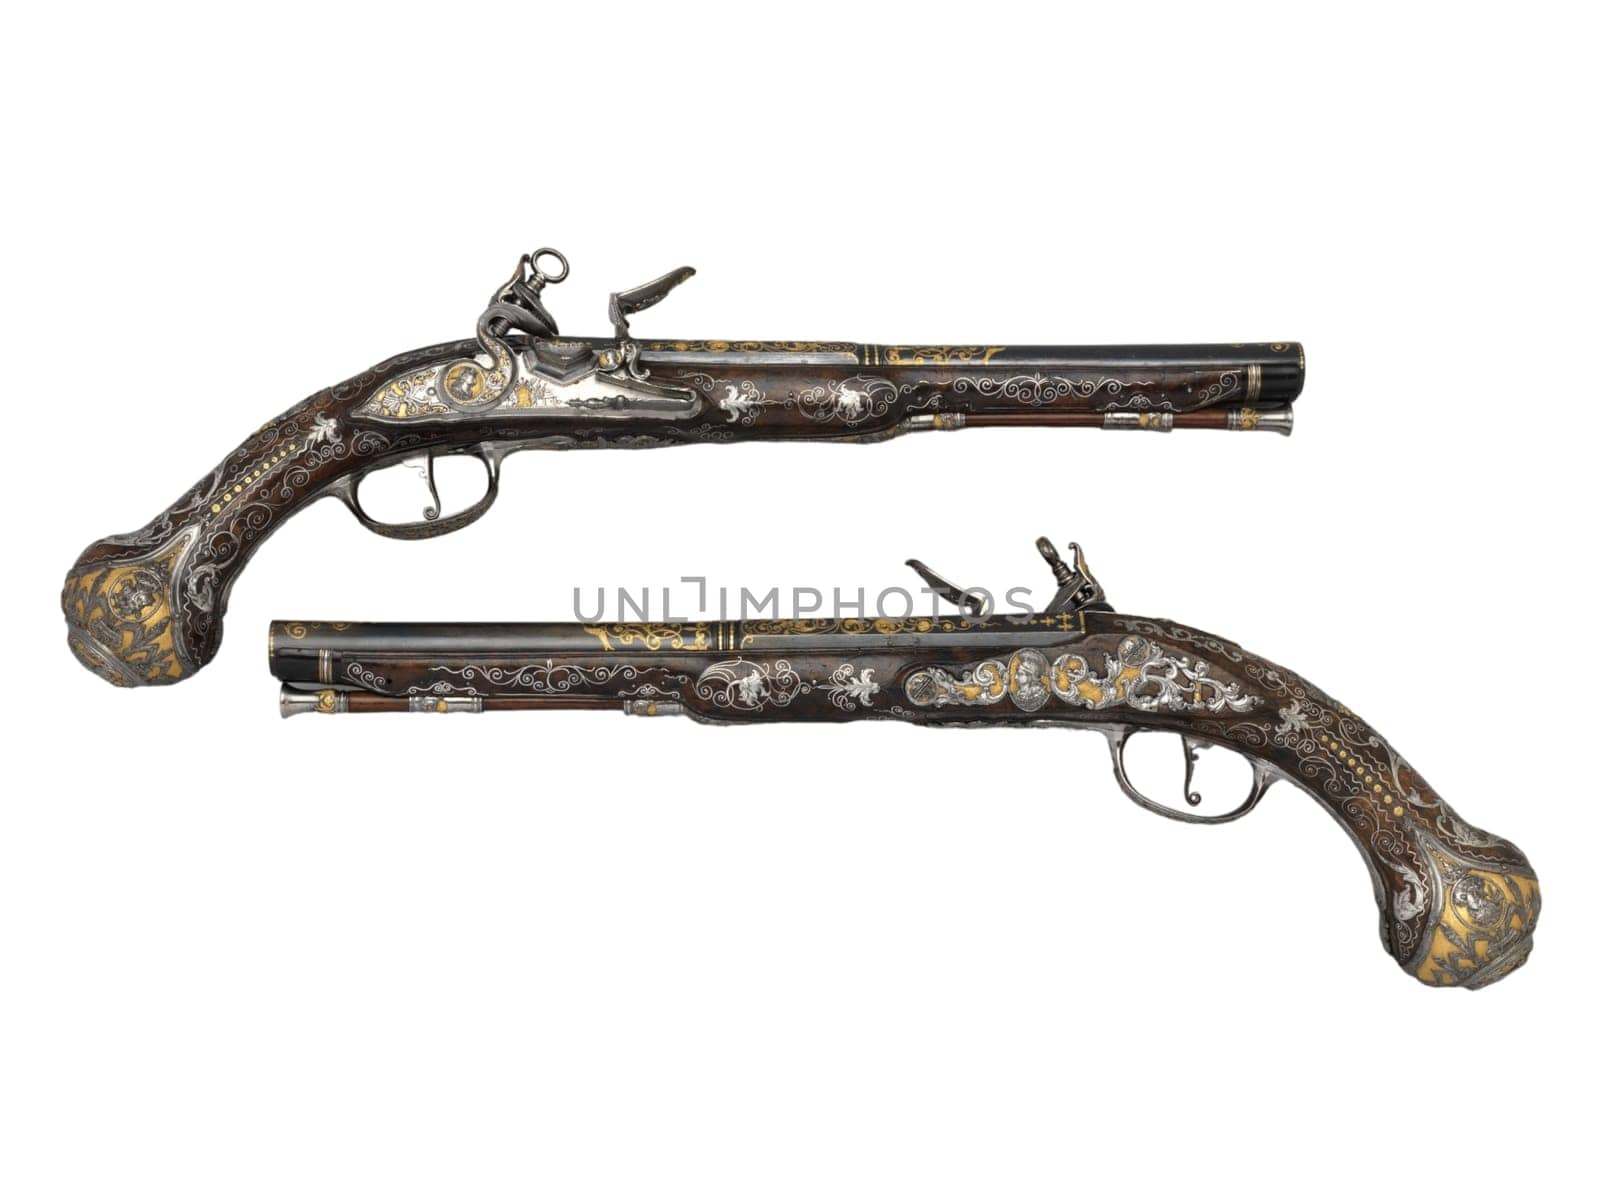 antique, vintage handguns from the 17th century. isolated background